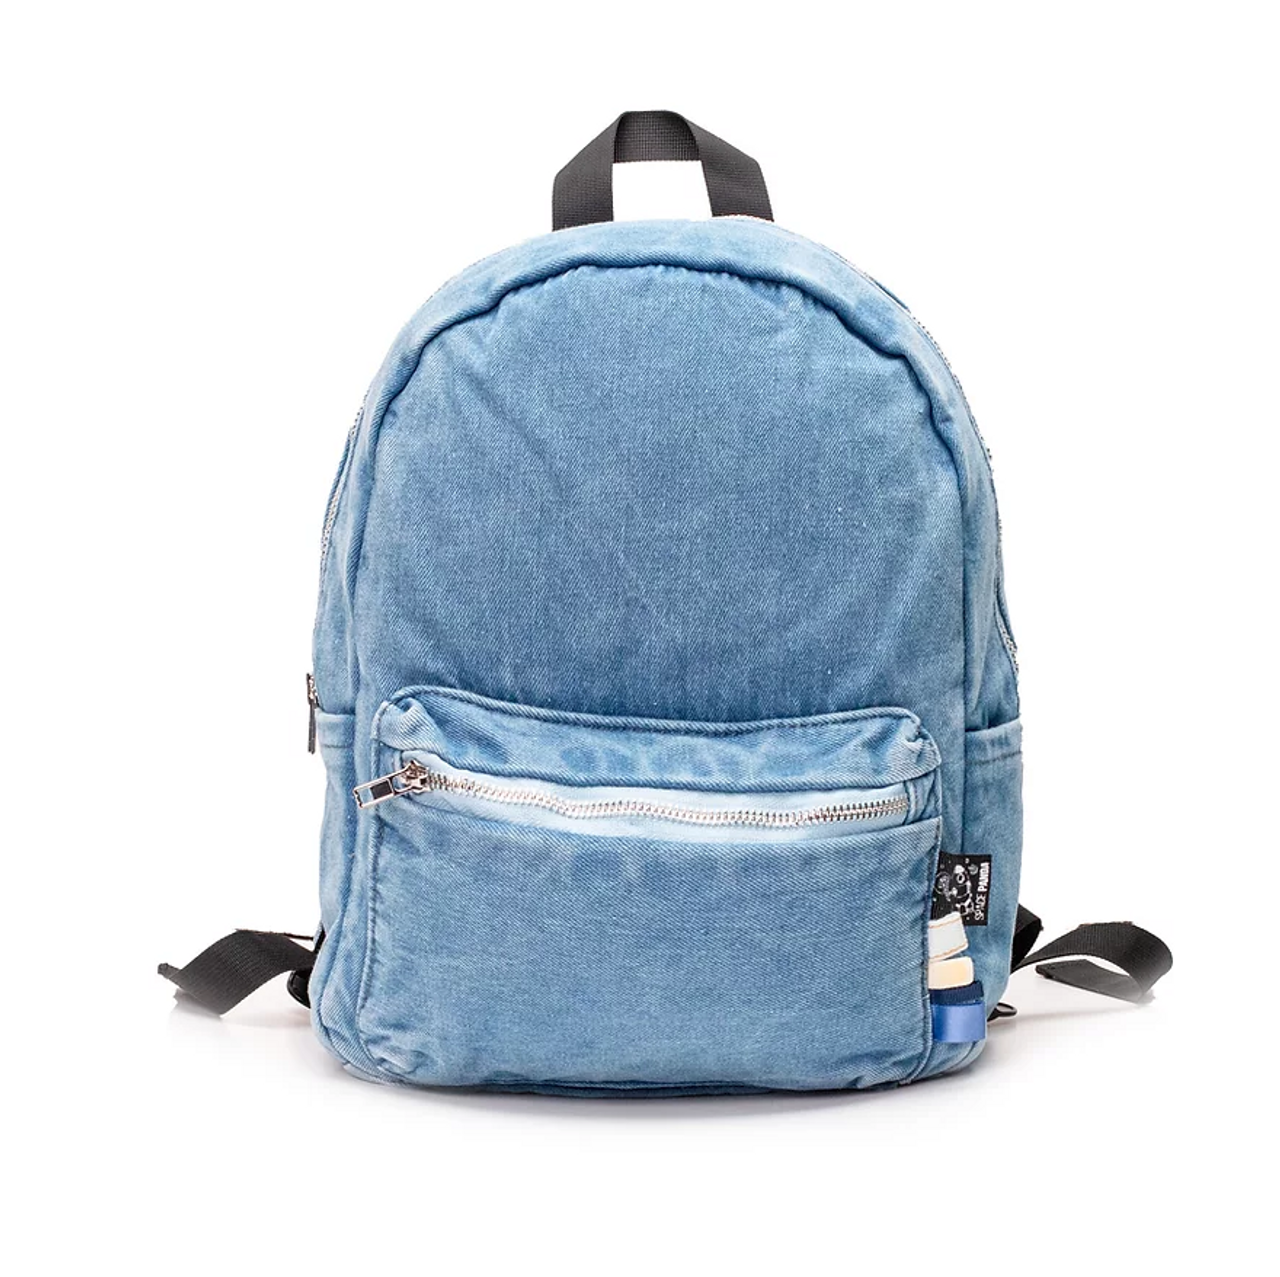 Small Backpack, Personalized, Blue Denim Space Panda